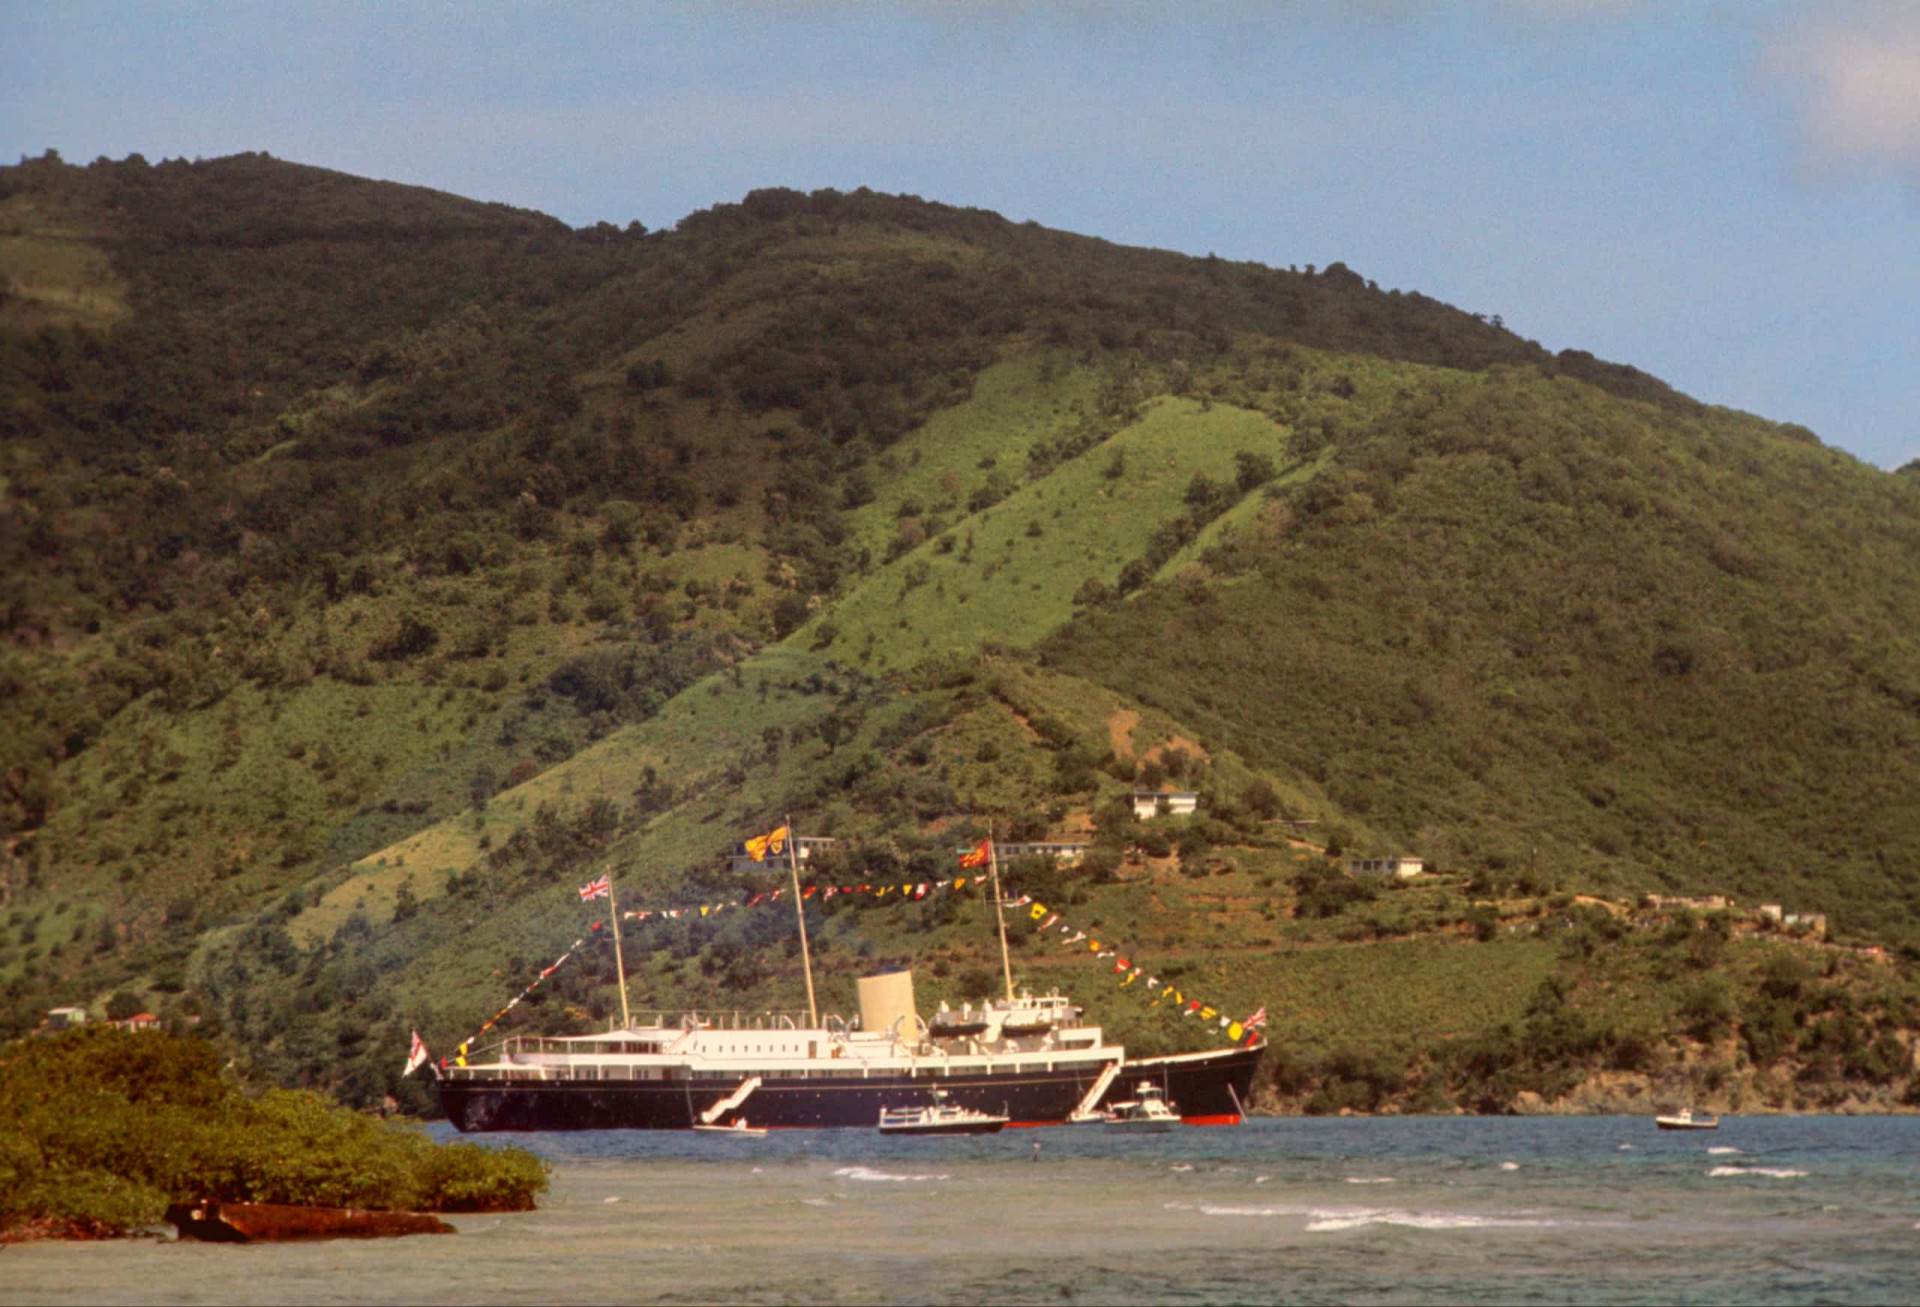 <p>In October 1977, the Royal Yacht <em>Britannia</em> anchored off Road Harbor during Queen Elizabeth II's visit to the British Virgin Islands as part of her Silver Jubilee tour of the Caribbean.</p><p>You may also like:<a href="https://www.starsinsider.com/n/350323?utm_source=msn.com&utm_medium=display&utm_campaign=referral_description&utm_content=474709v3en-us"> Celebs reveal the stories behind their stage names</a></p>